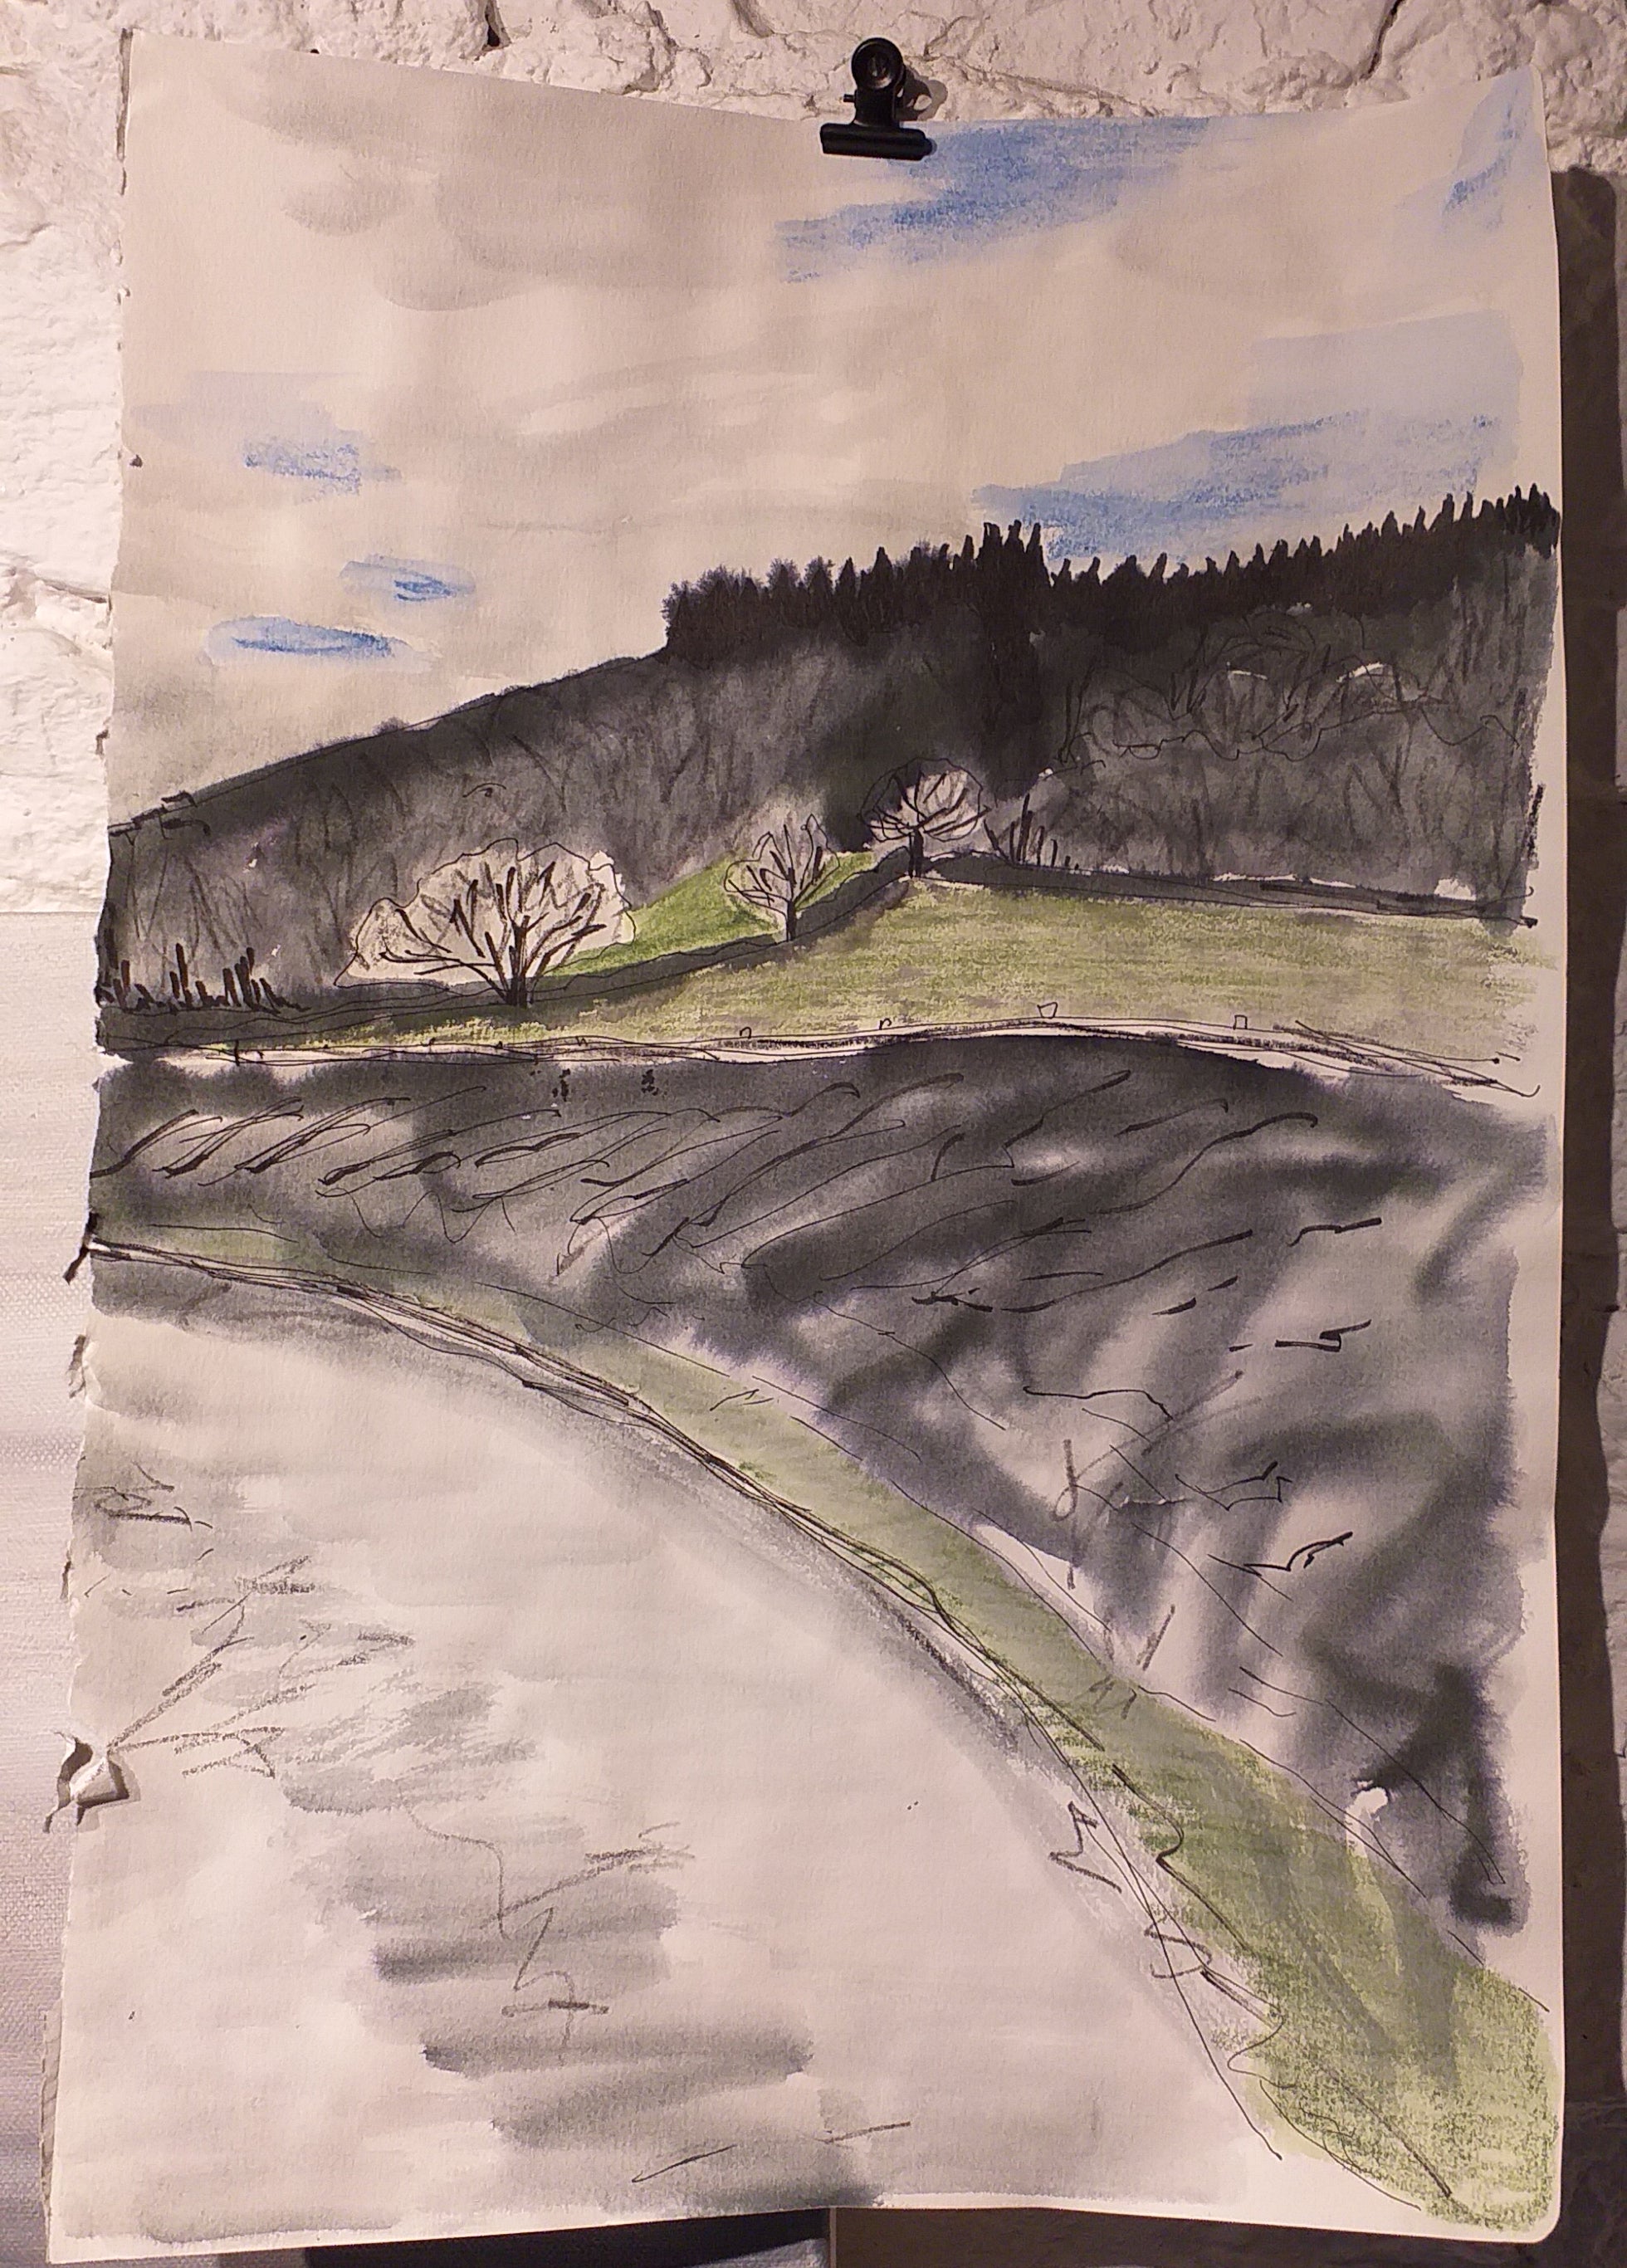 Initial landscape study on A3 sketchbook paper by Alice Draws the Line